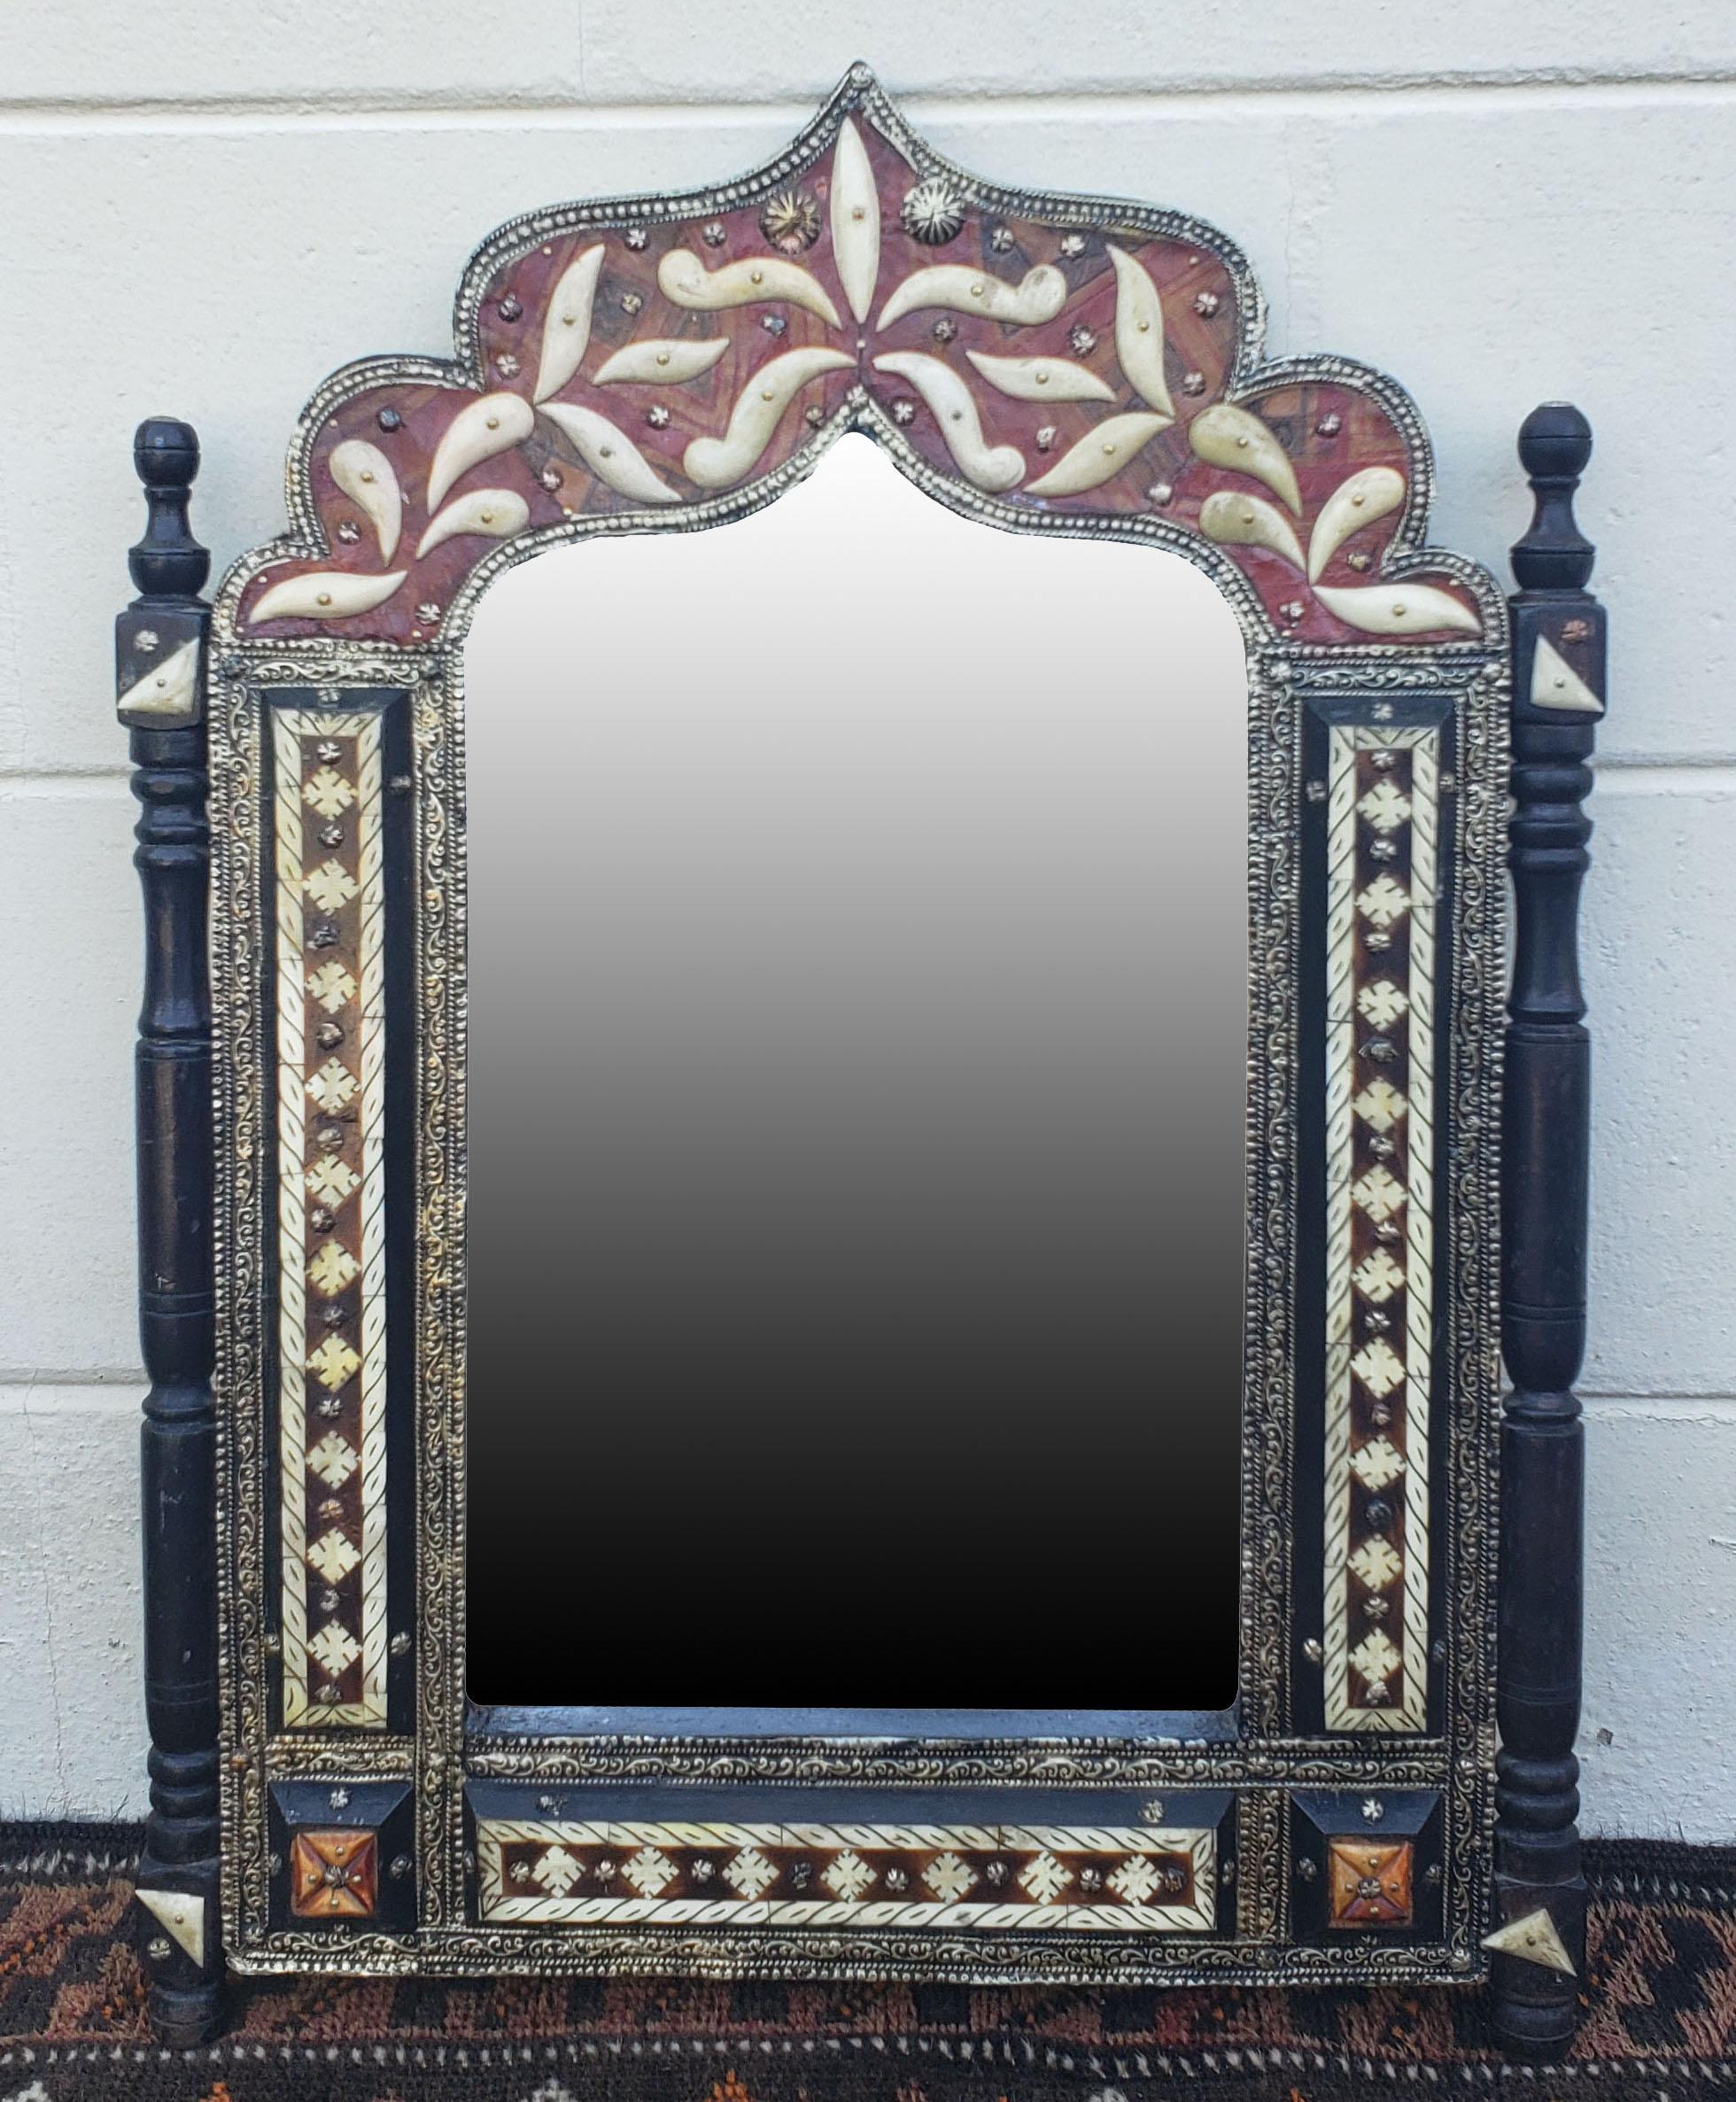 Small size metal and camel bone inlay Moroccan mirror. Made in the city of Marrakech. Rectangular shape with an arched top, and measuring approximately 23.5